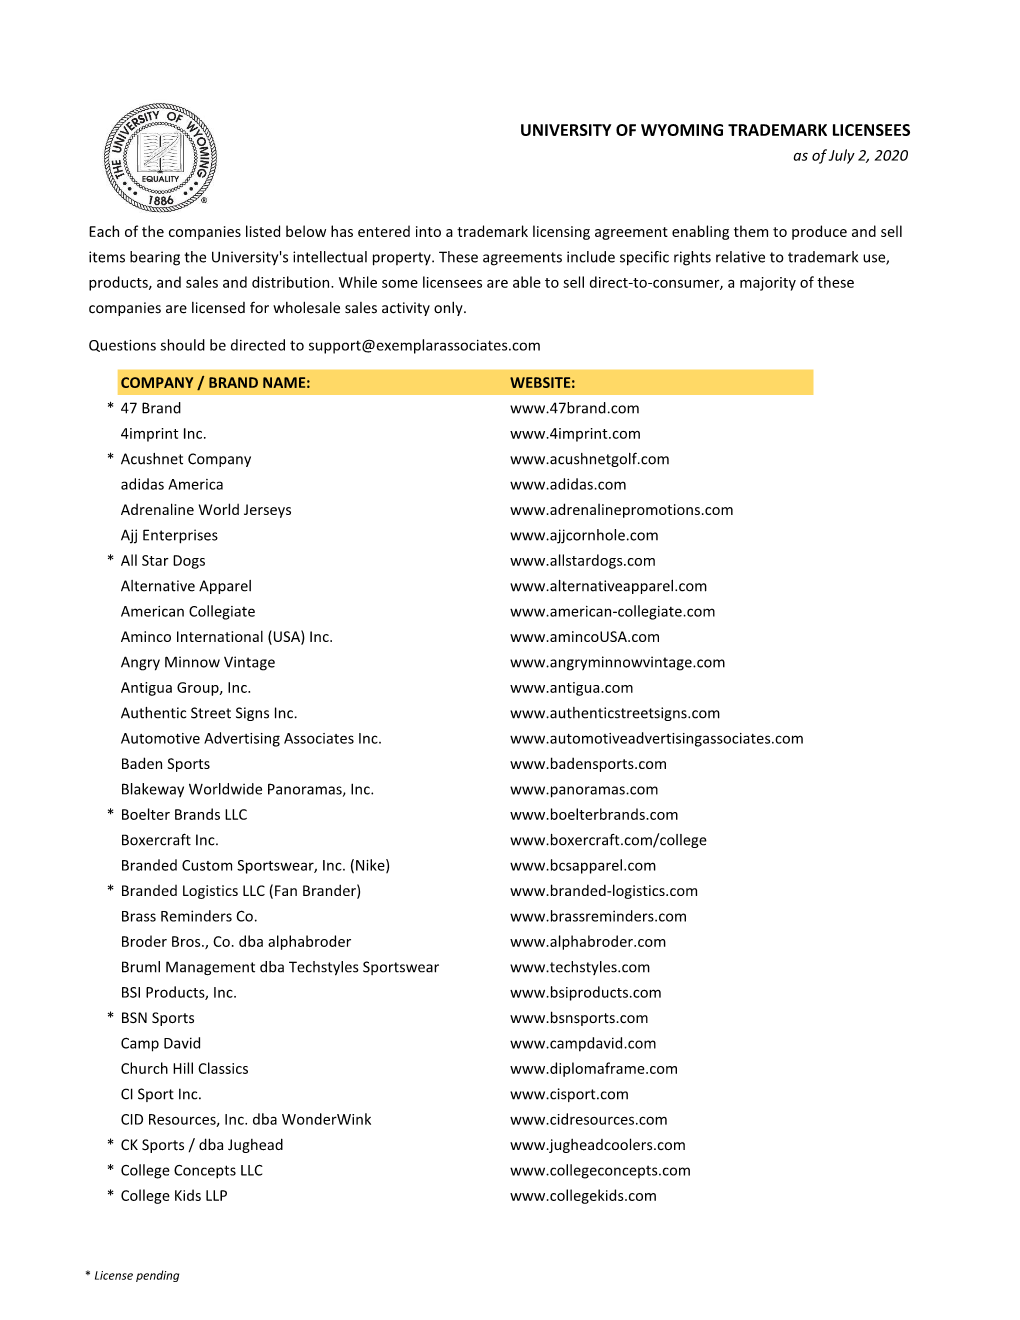 UNIVERSITY of WYOMING TRADEMARK LICENSEES As of July 2, 2020